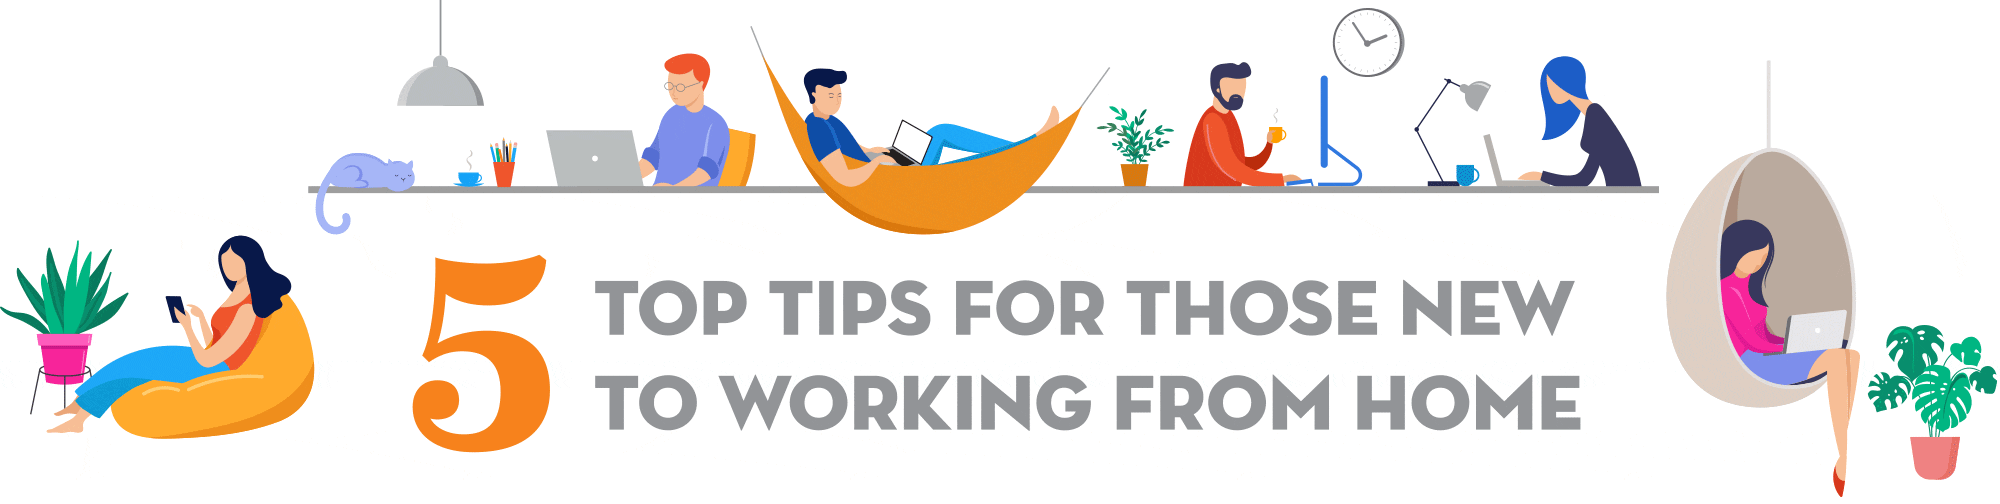 5 Top Tips for Those New to Working from Home